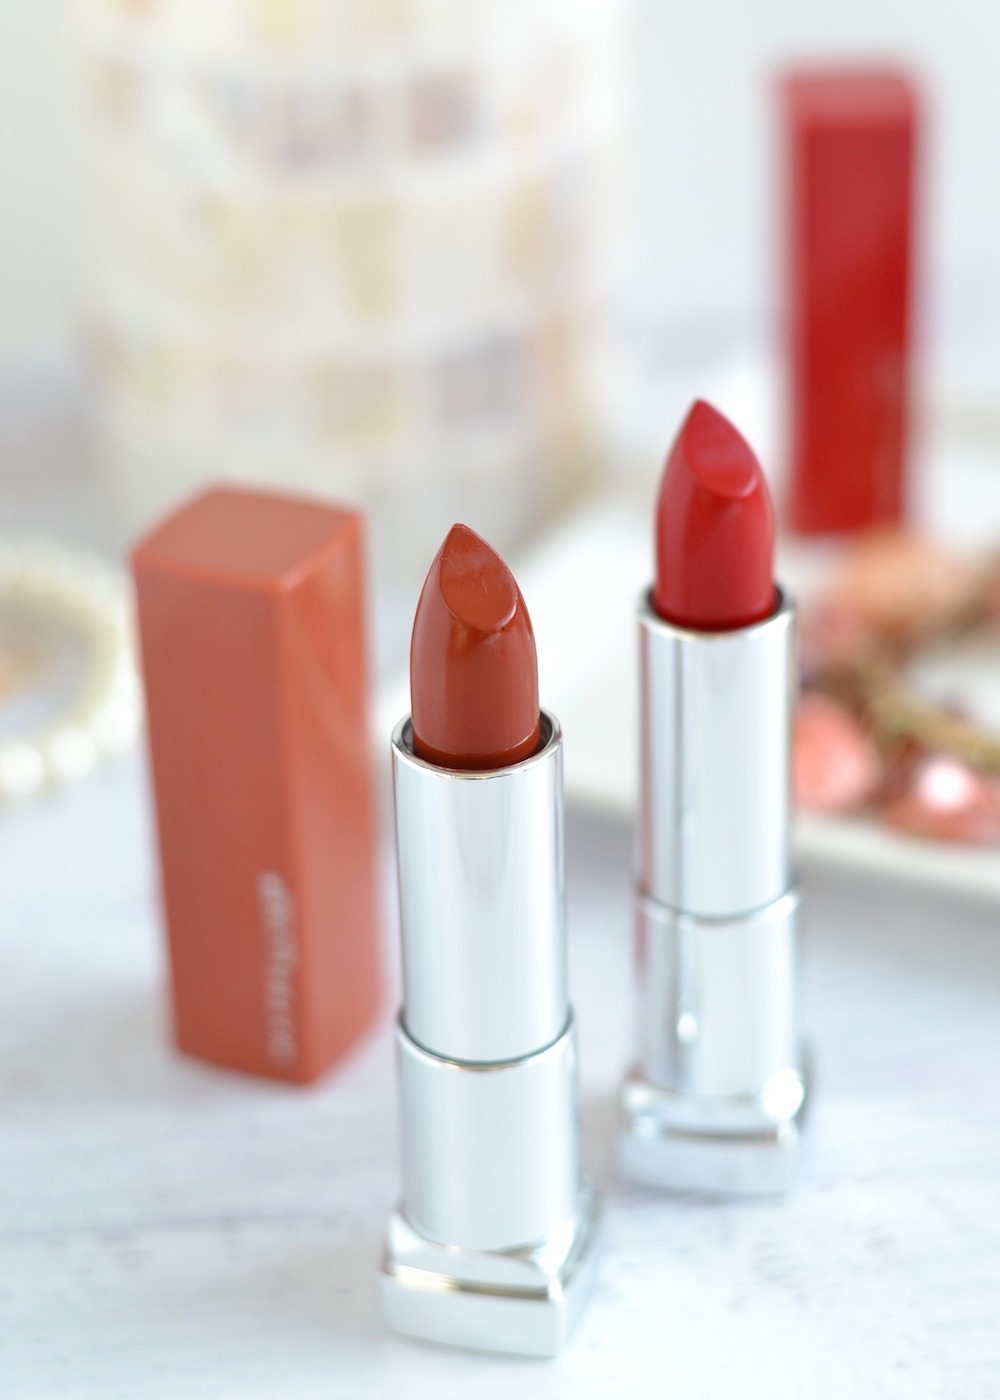 Maybelline Made For All Lipstick - Spice For Me